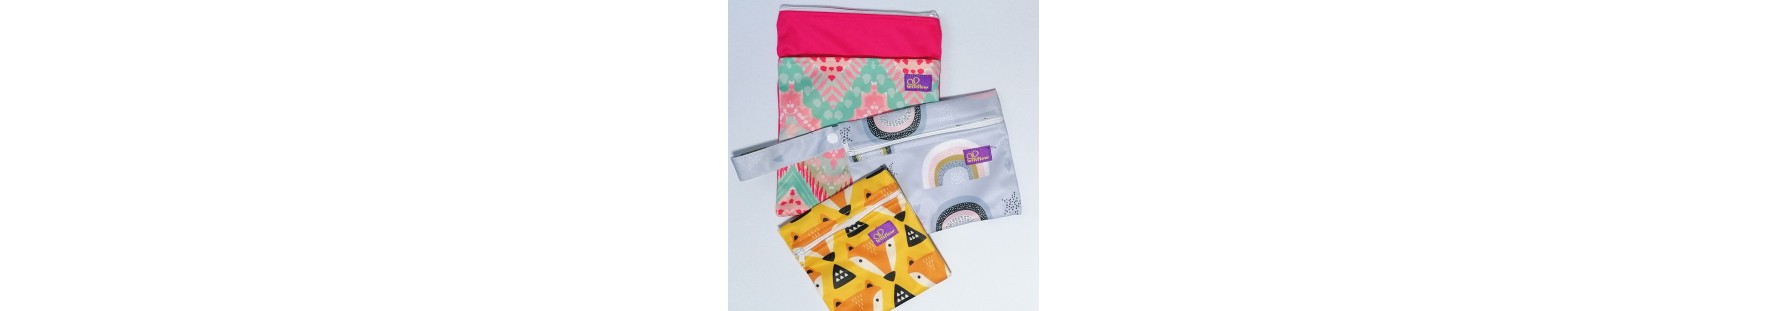 Bags and wet bags for the storage of menstrual cups, cloth pads